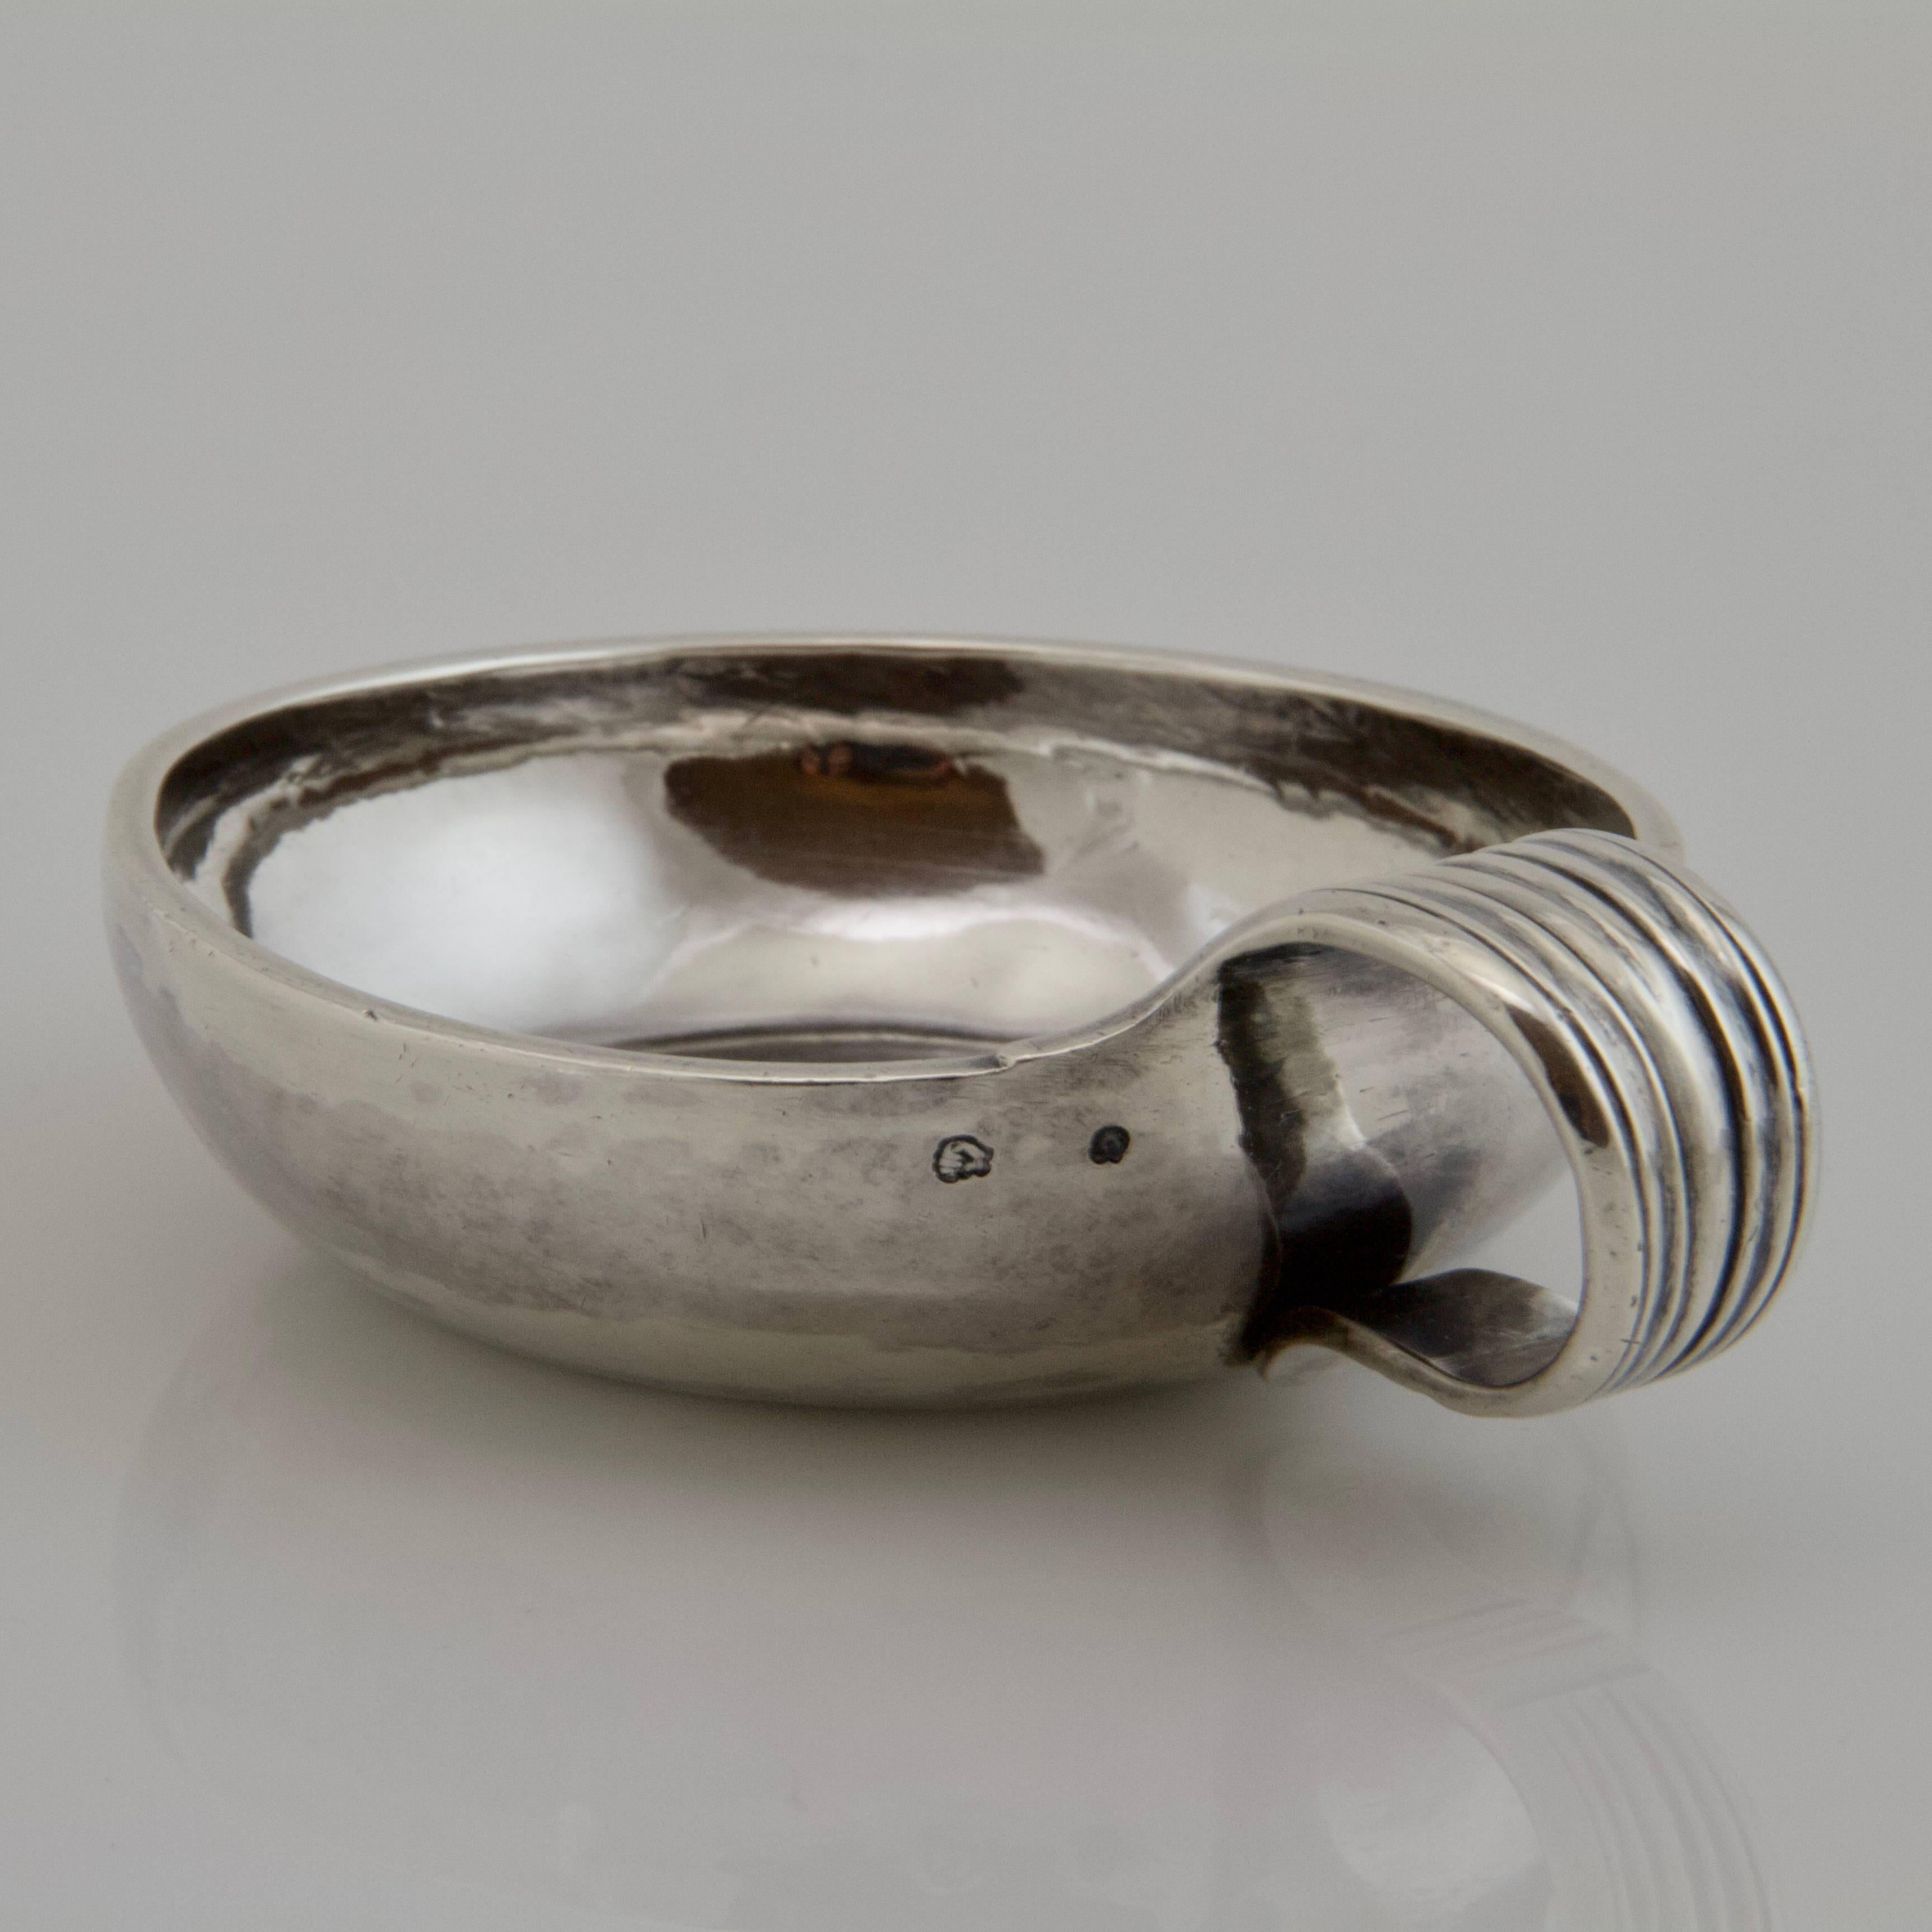 Sterling silver wine tasting cup. Hammered straight body. Reeded handle.
Makers mark: Pierre IX Hanappier (Helft, Province: p 244, 691d)
Assay marks for Orléans 1766-1768 (Helft, Province: 692a et b.
Weight: 119g
Pierre IX Hanappier became